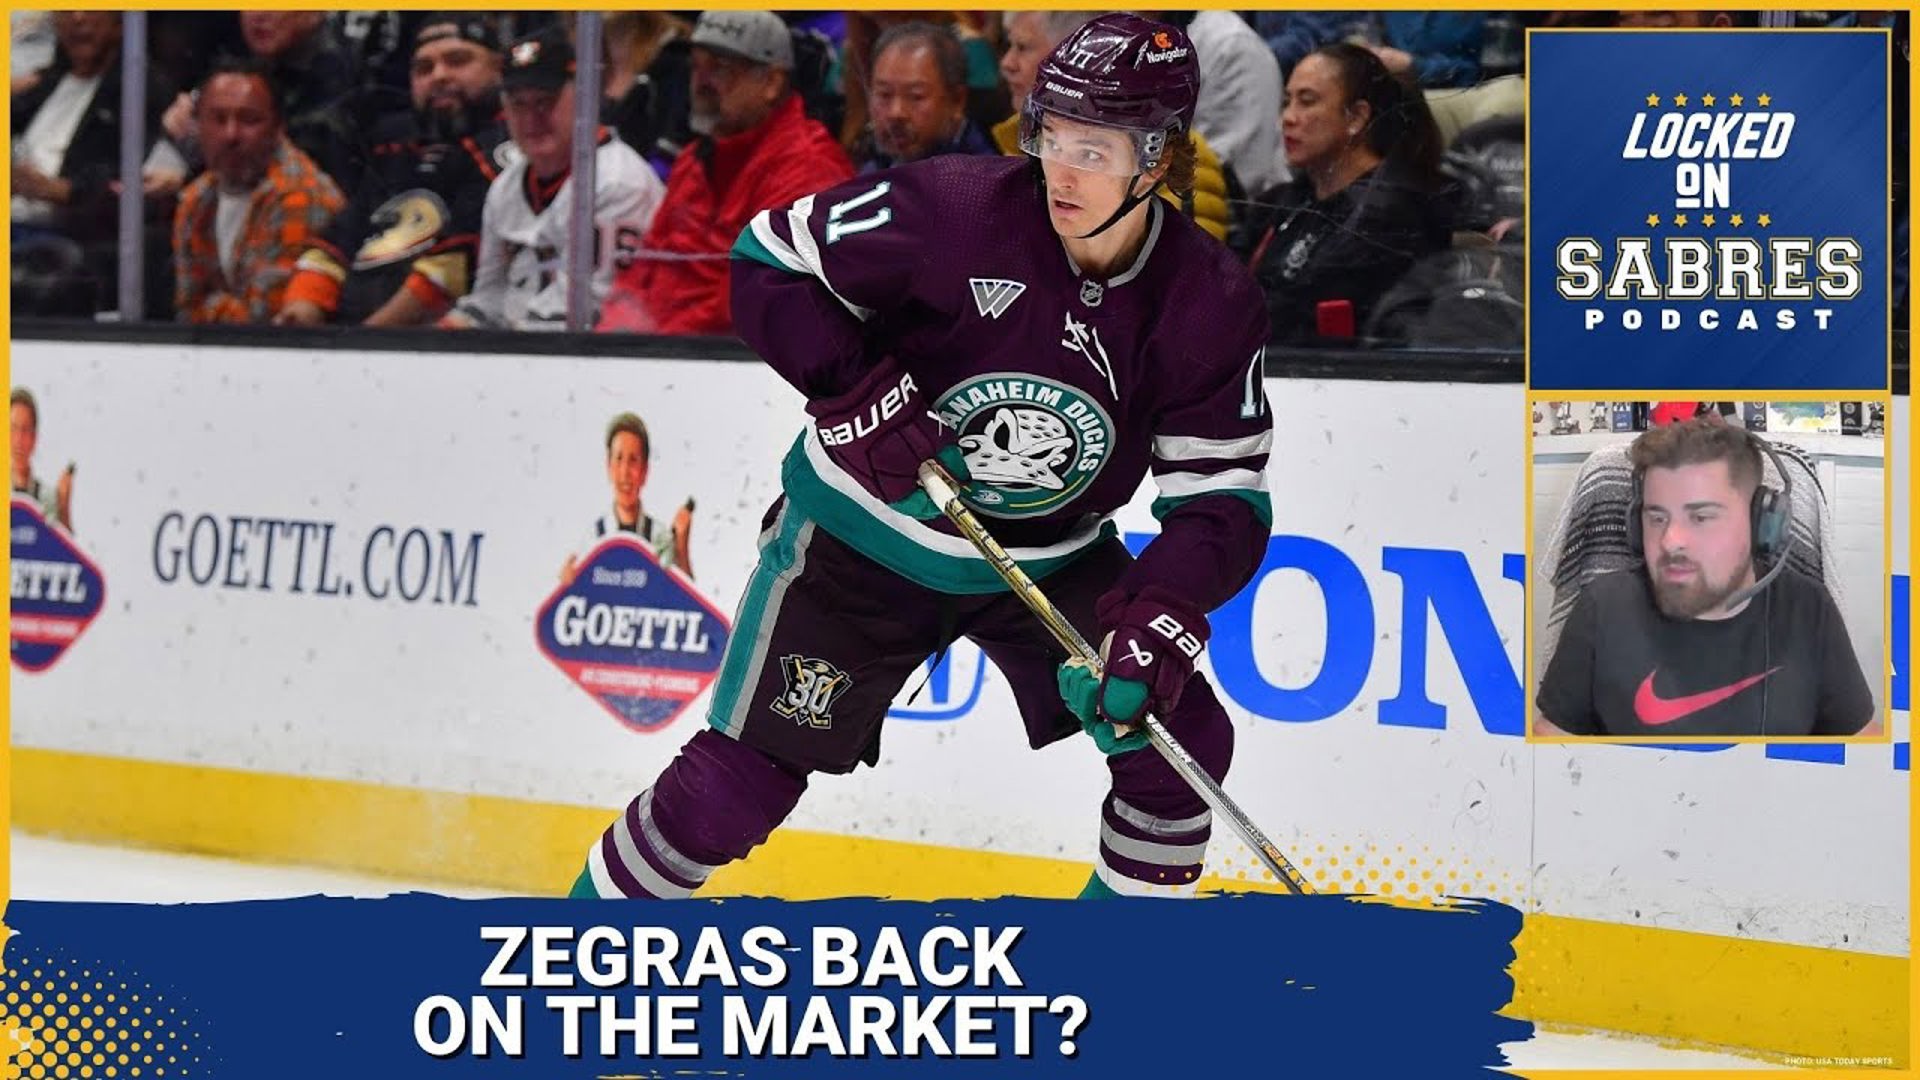 Trevor Zegras back on the trade market, could the Sabres make the move?